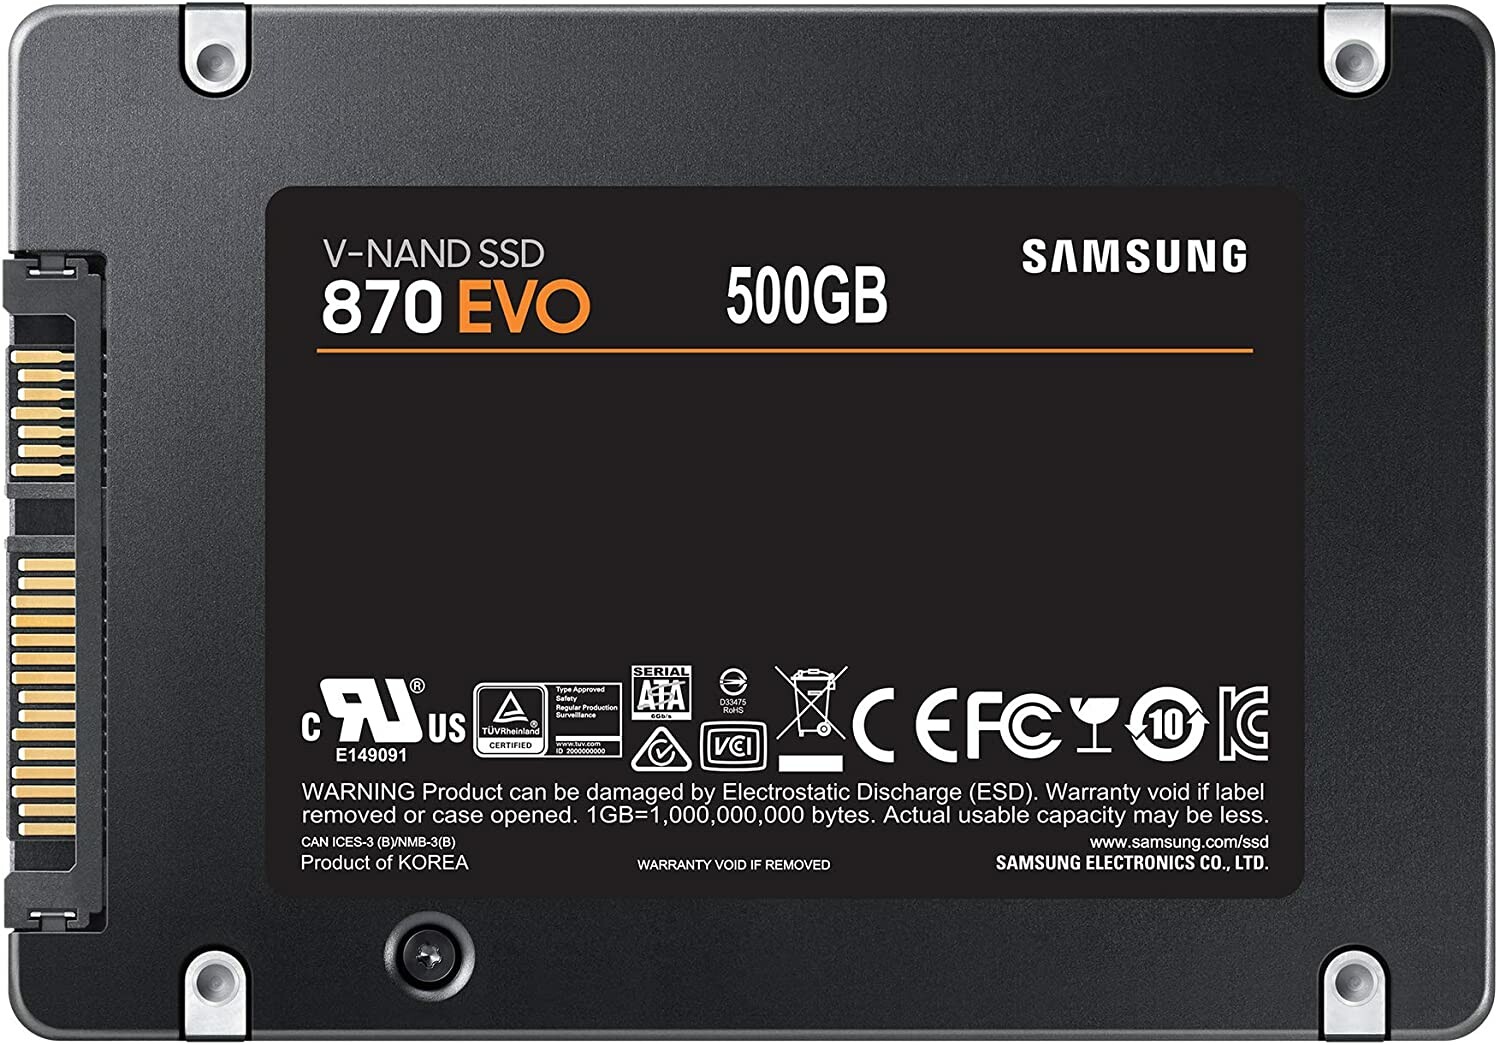 Disque SSD Samsung 870 QVO 1 To, Format 2.5